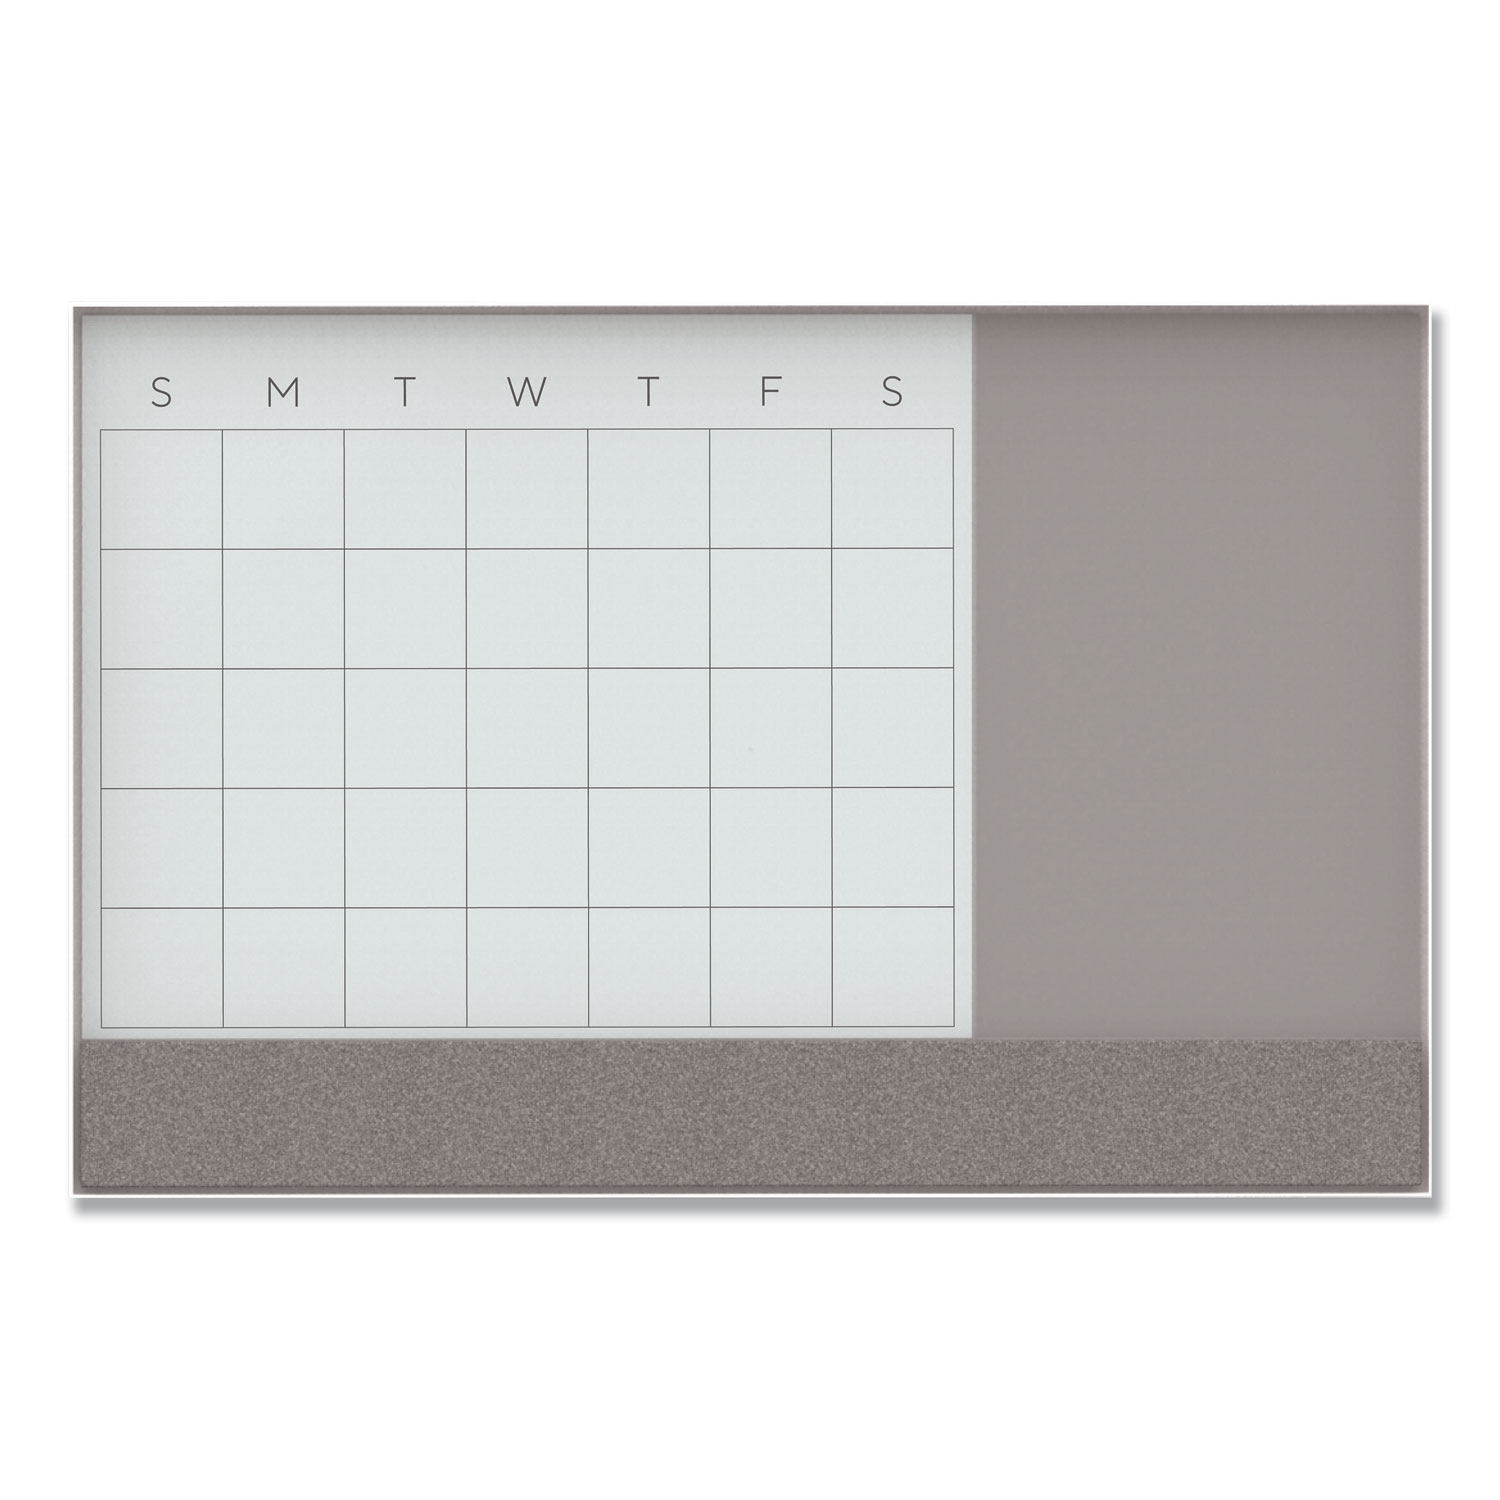  U Brands 3198U00-01 3N1 Magnetic Glass Dry Erase Combo Board, 48 x 36, Month View, White Surface and Frame (UBR3198U0001) 